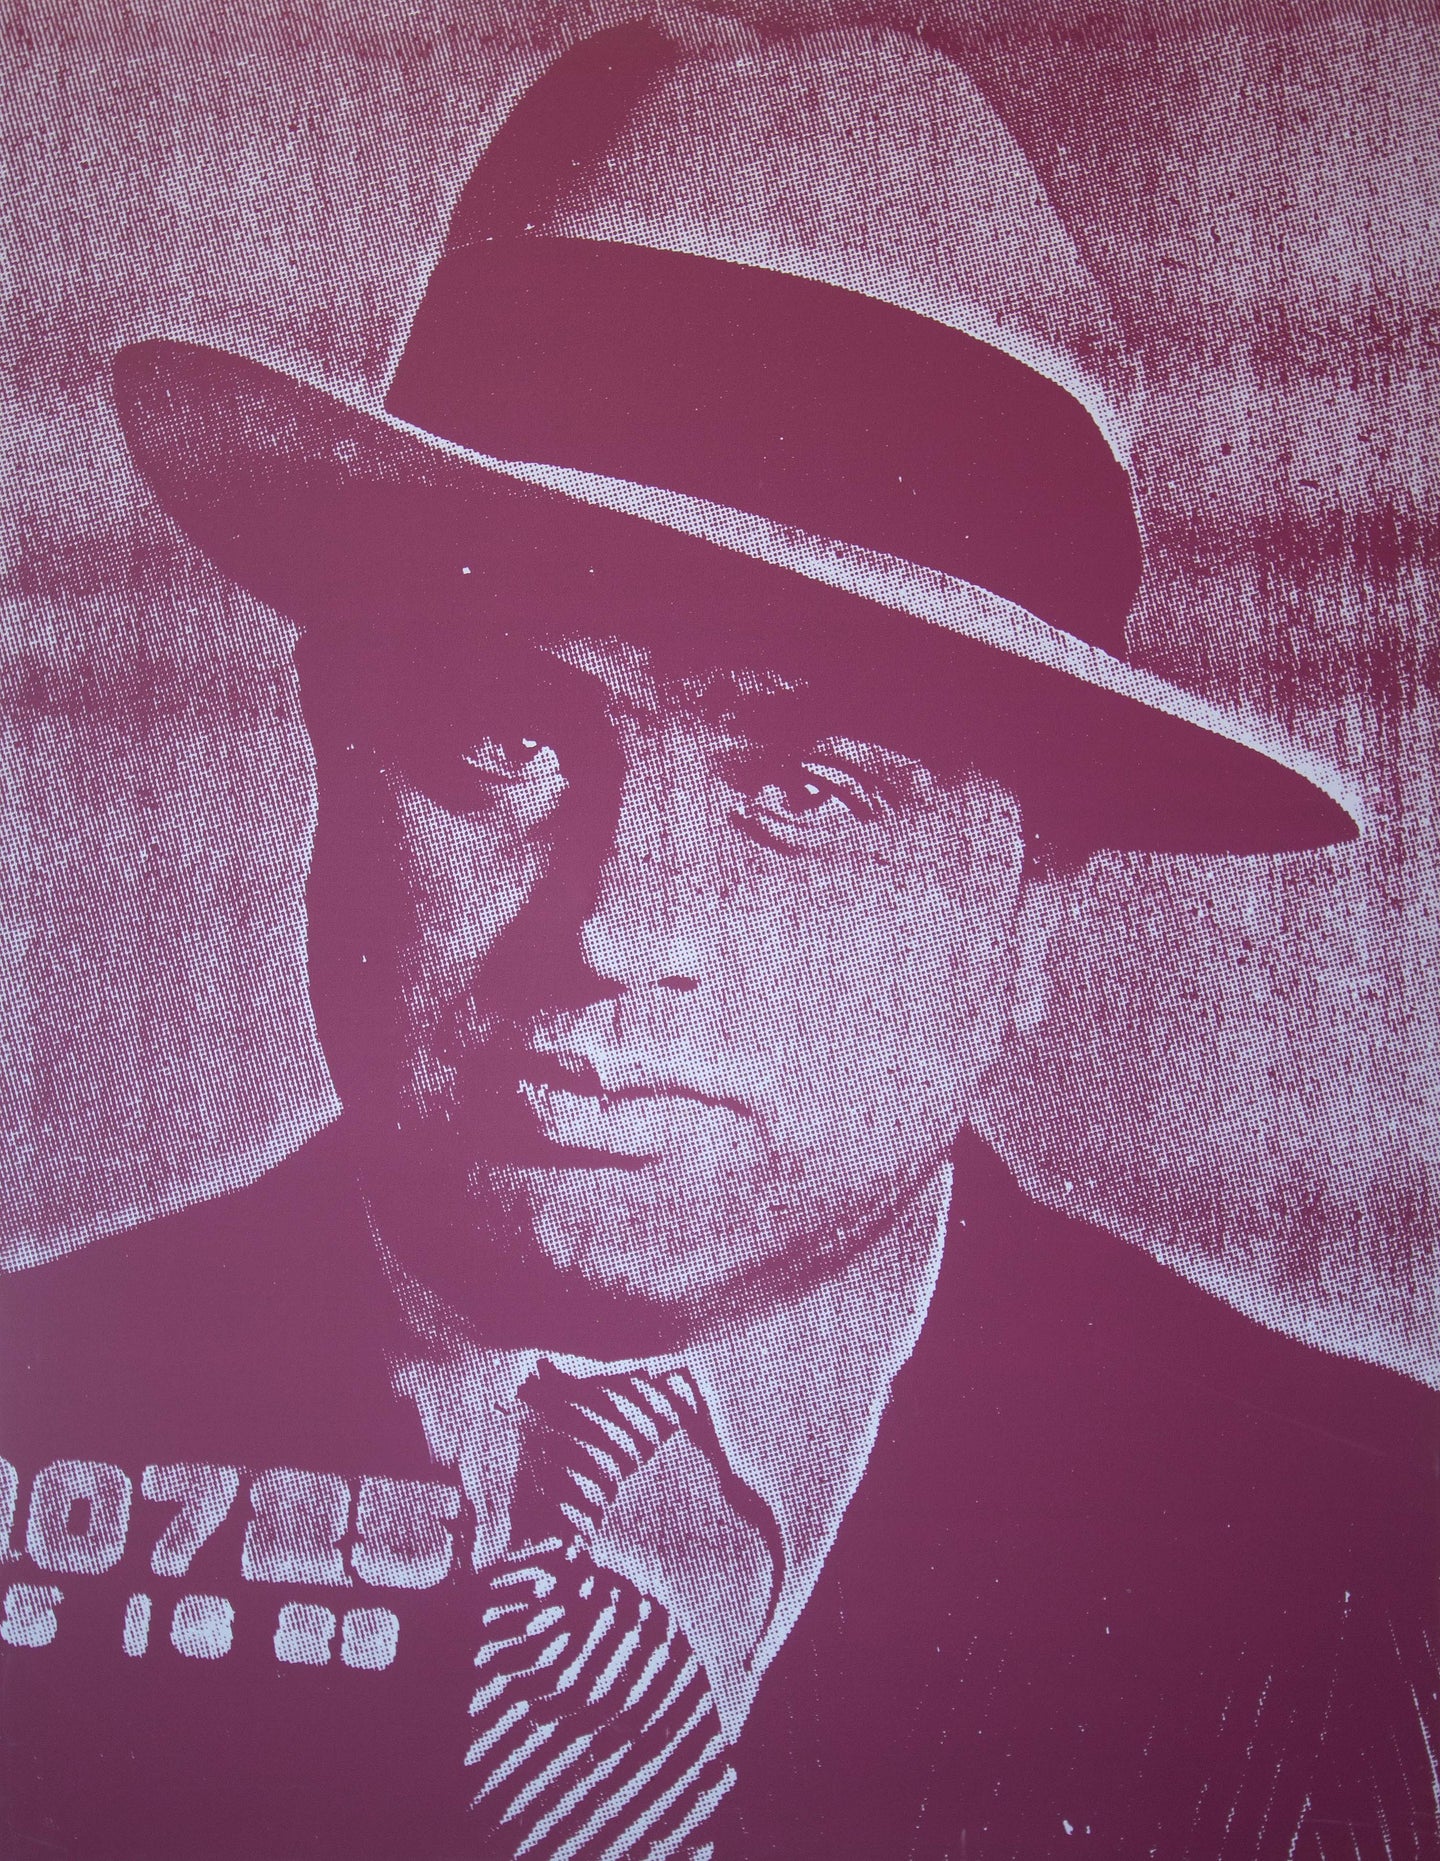 Russell Young, Al Capone, 2002, Acrylic screenprint on canvas, 62 x 48 inches, Artist Proof, Russell Young Art for sale